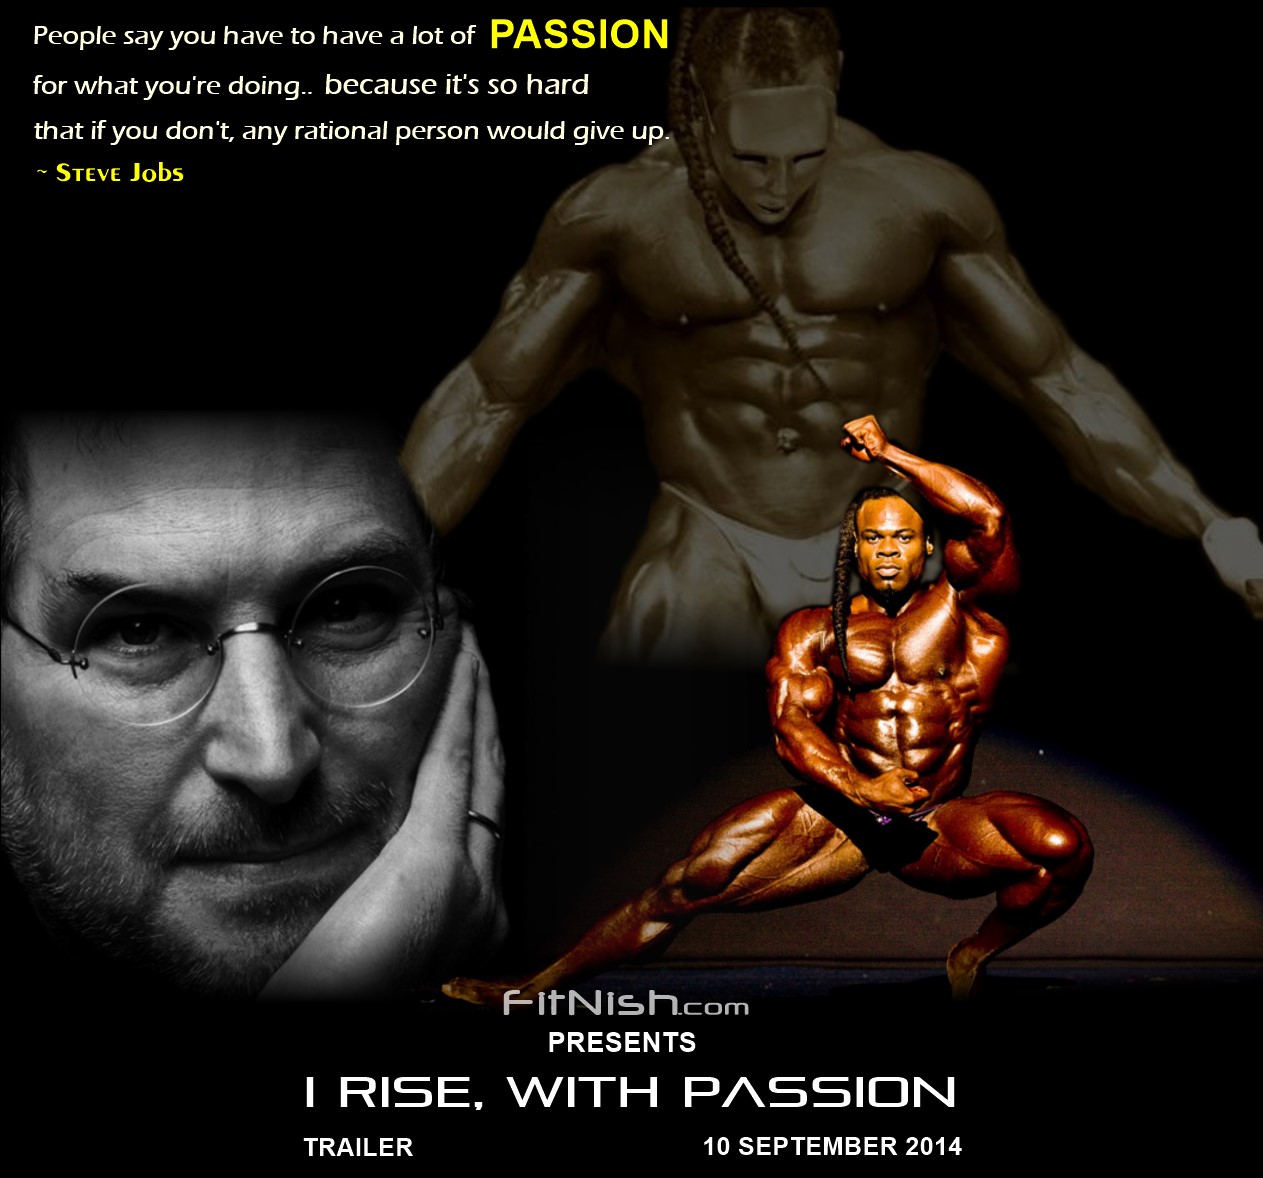 i rise with passion trailer